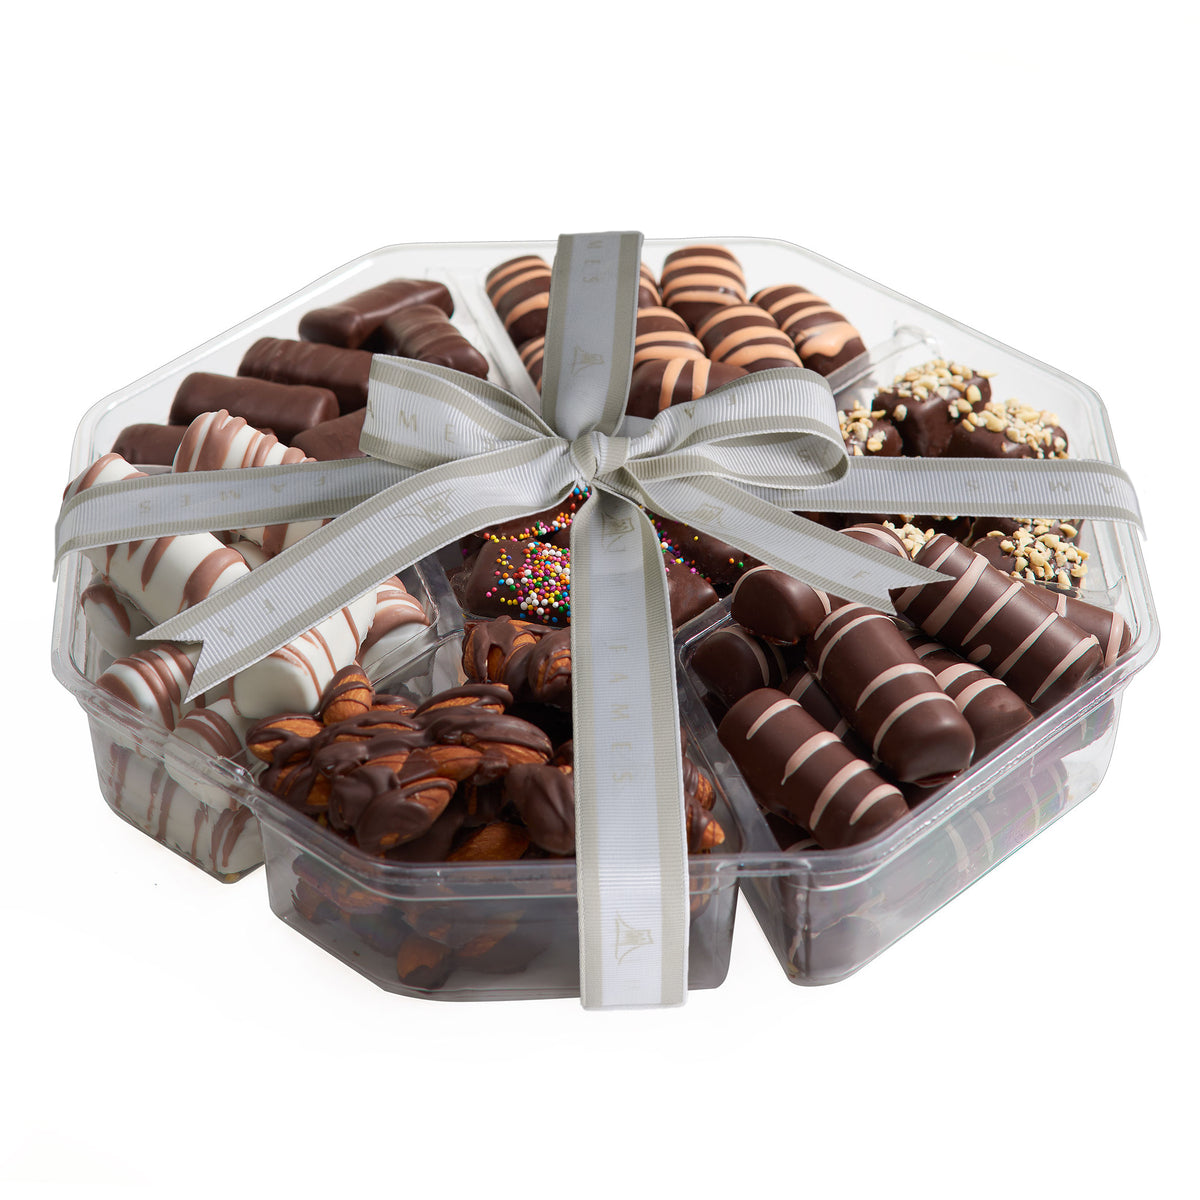 Chocolate Gift Baskets For Families - 3 Pack, Dairy Free, Kosher.  Fames Chocolate